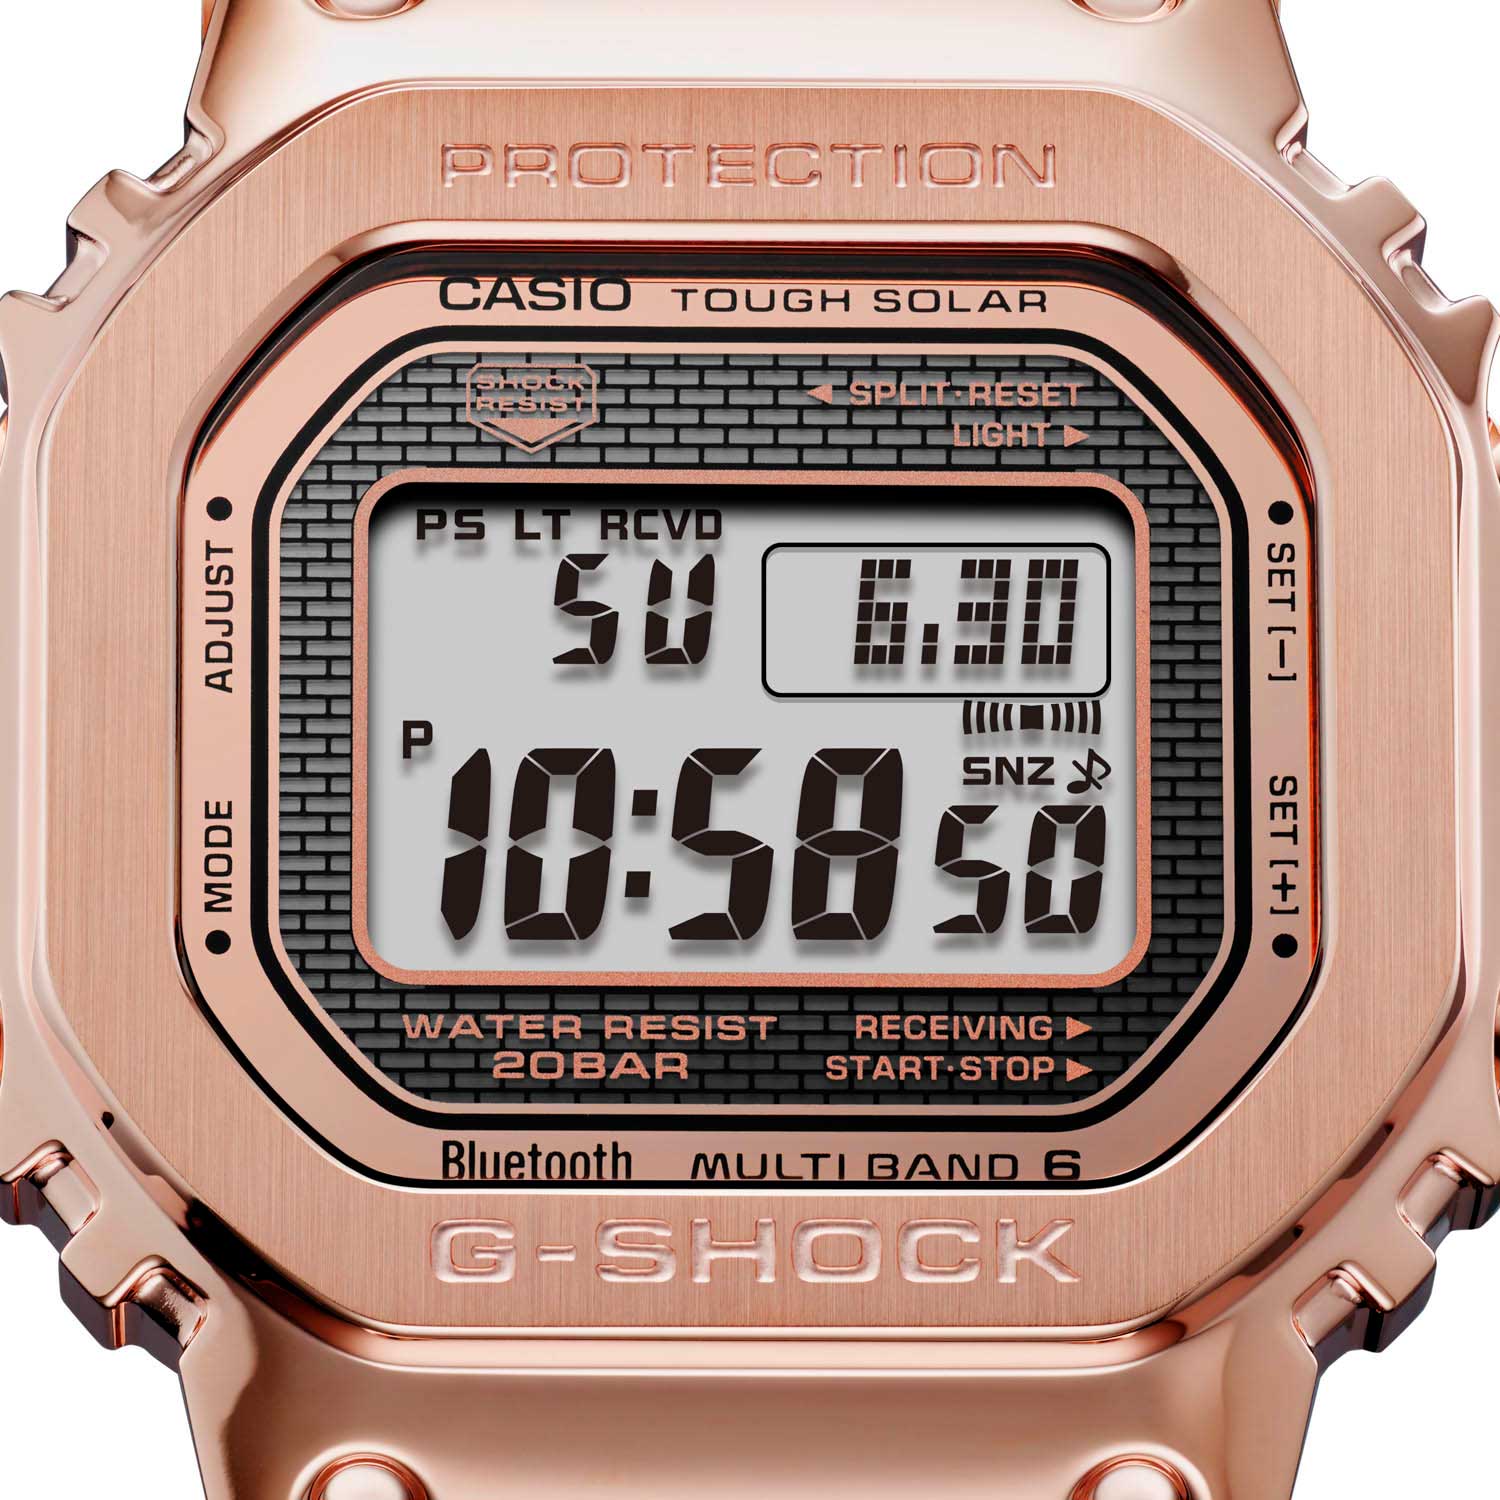 The GMW-B5000GD-4 is a stylish addition to Casio’s diverse lineup that offers Multi-Band 6 Atomic timekeeping, solar powered battery and phone-finder function.